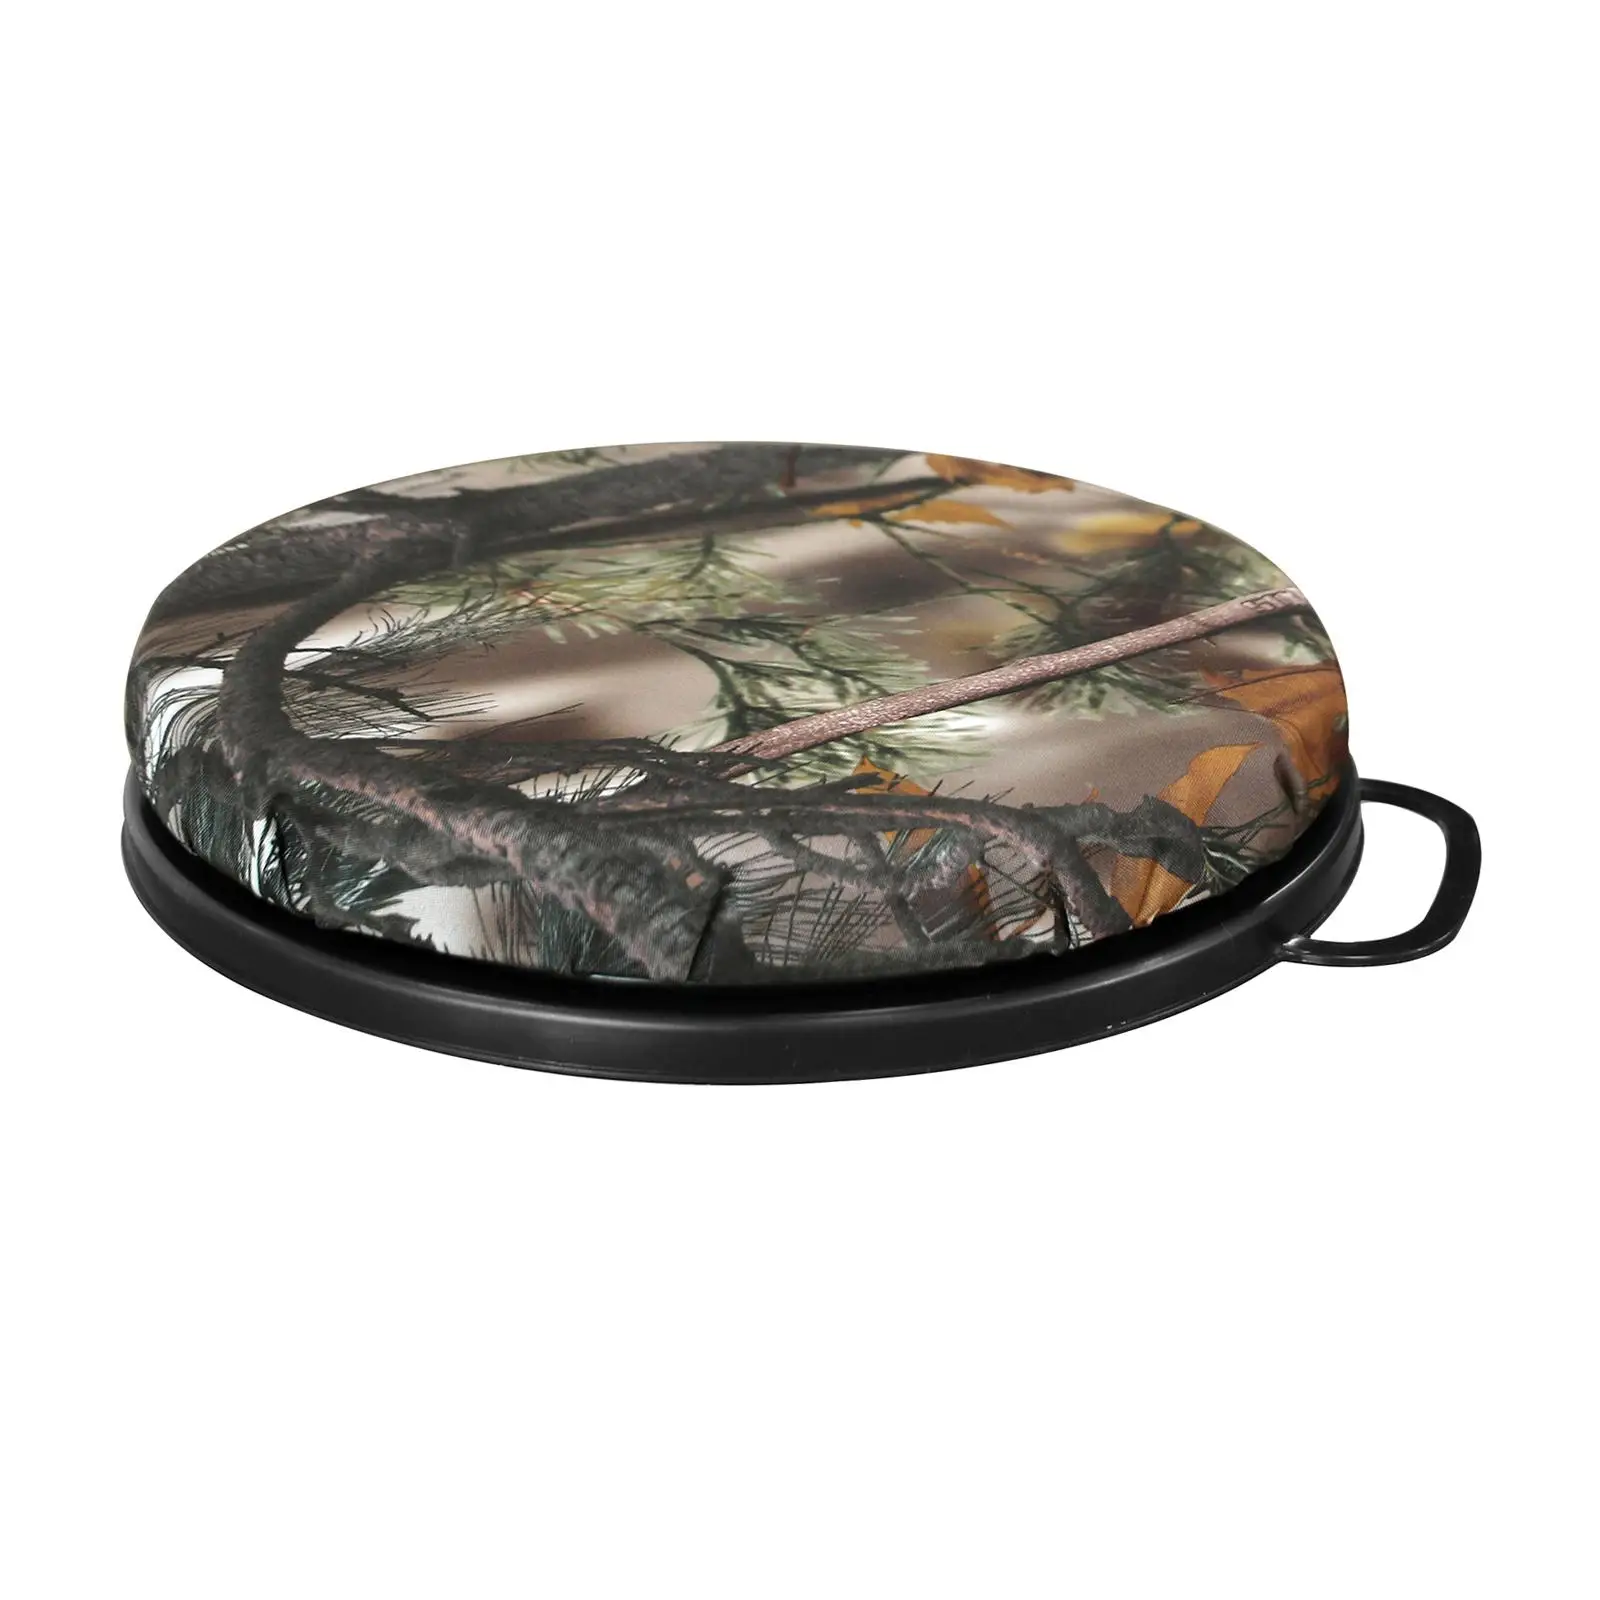 Portable Hunting Seat Cushion Waterproof Thickened for Outdoor Garden Hiking